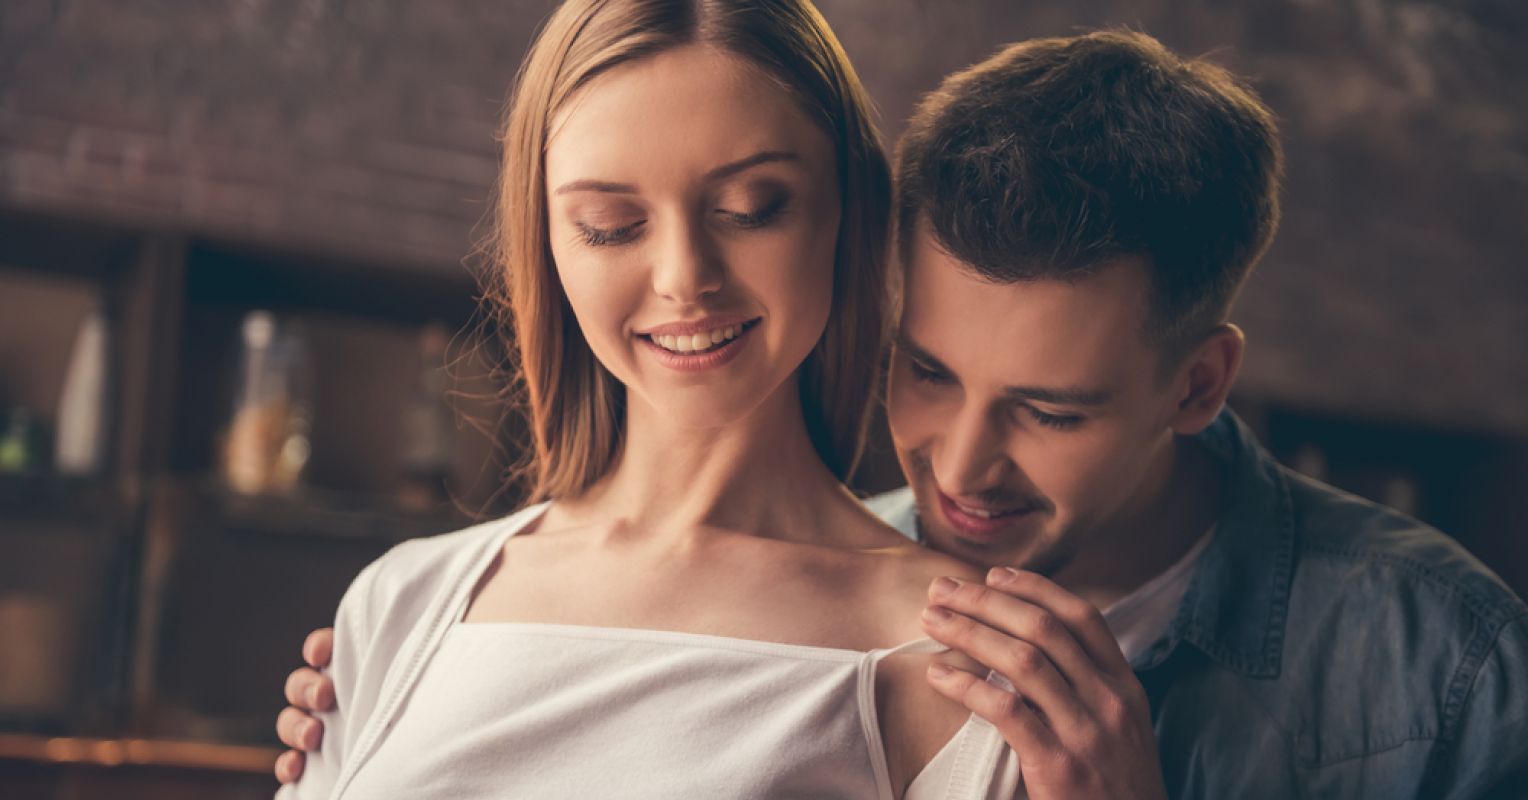 3 Reasons Why Some Couples Have More Sex Than Others Psychology Today image